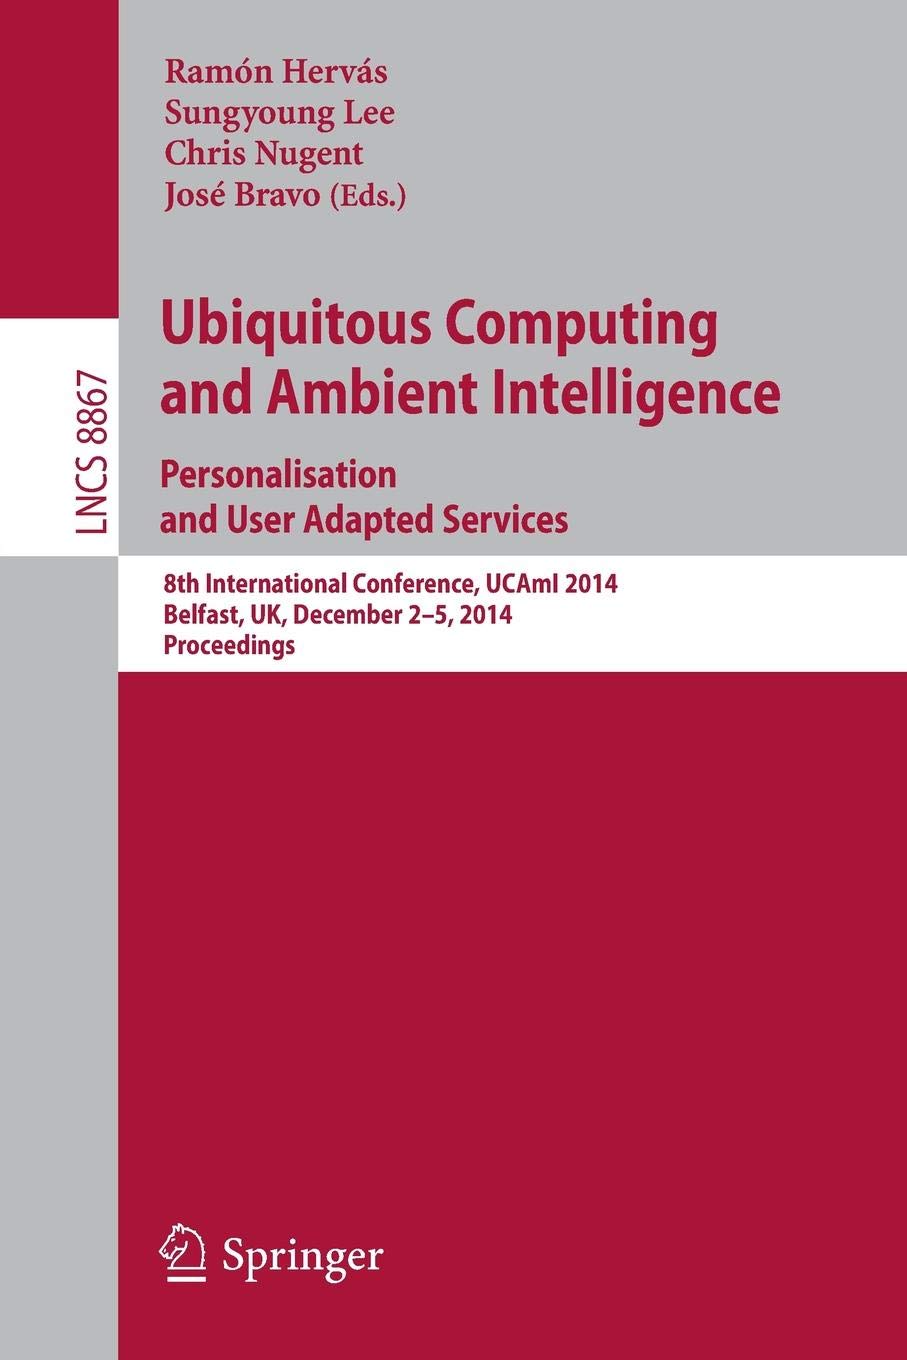 Ubiquitous Computing and Ambient Intelligence: Personalisation and User Adapted Services: 8th International Conference, UCAmI 2014, Belfast, UK, ... (Lecture Notes in Computer Science)